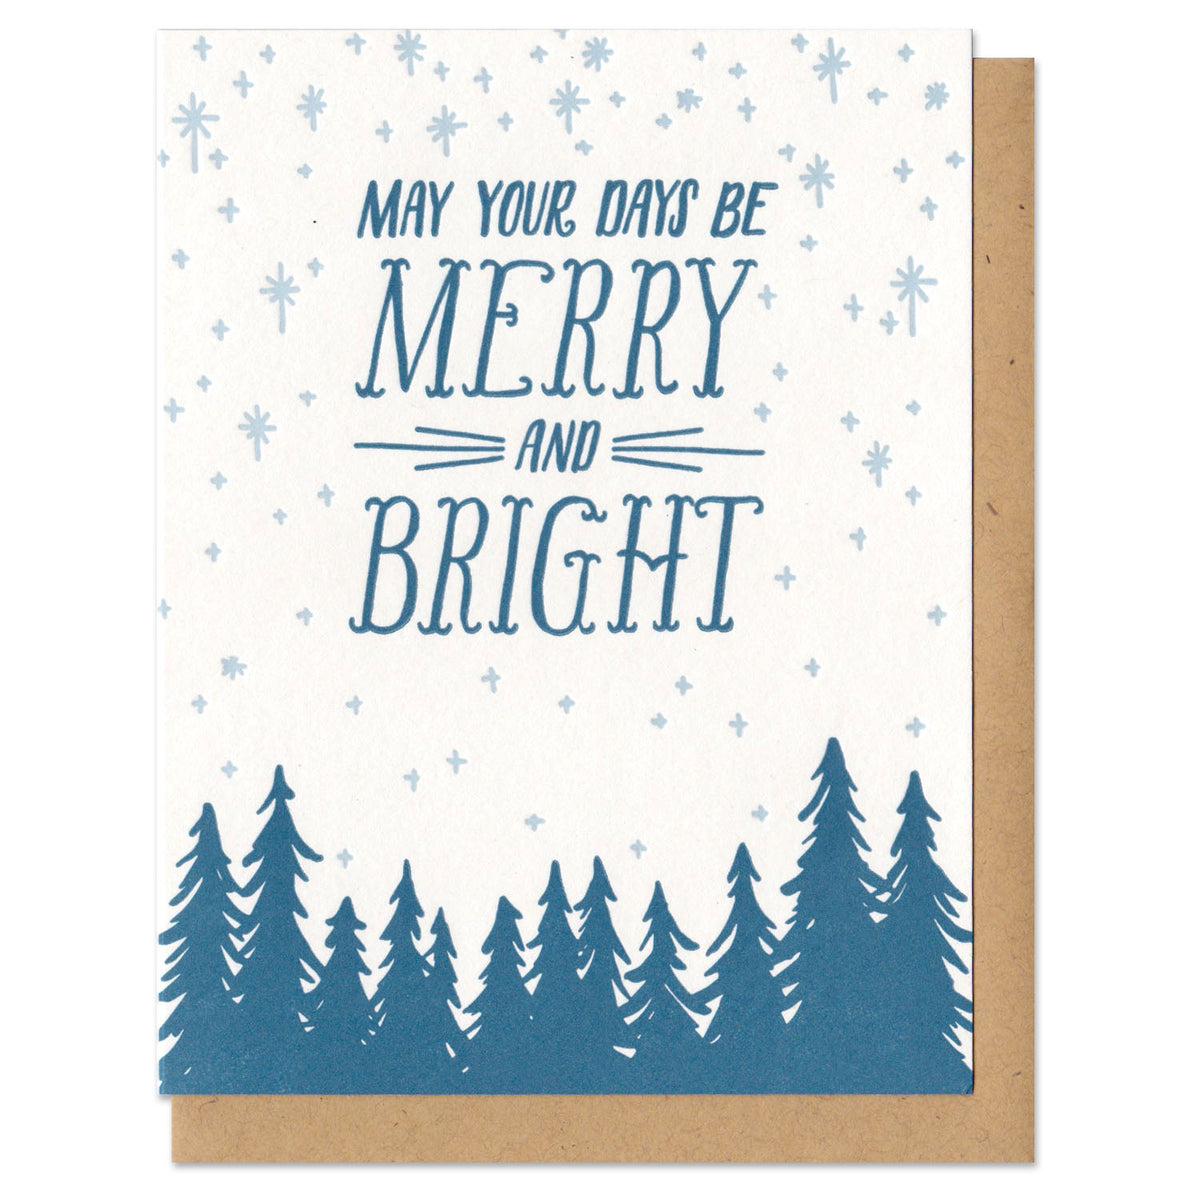 May your days be Merry and Bright: Merry Christmas & Happy New Year,  Beautiful Notebook gift 6x9 (120 pages)